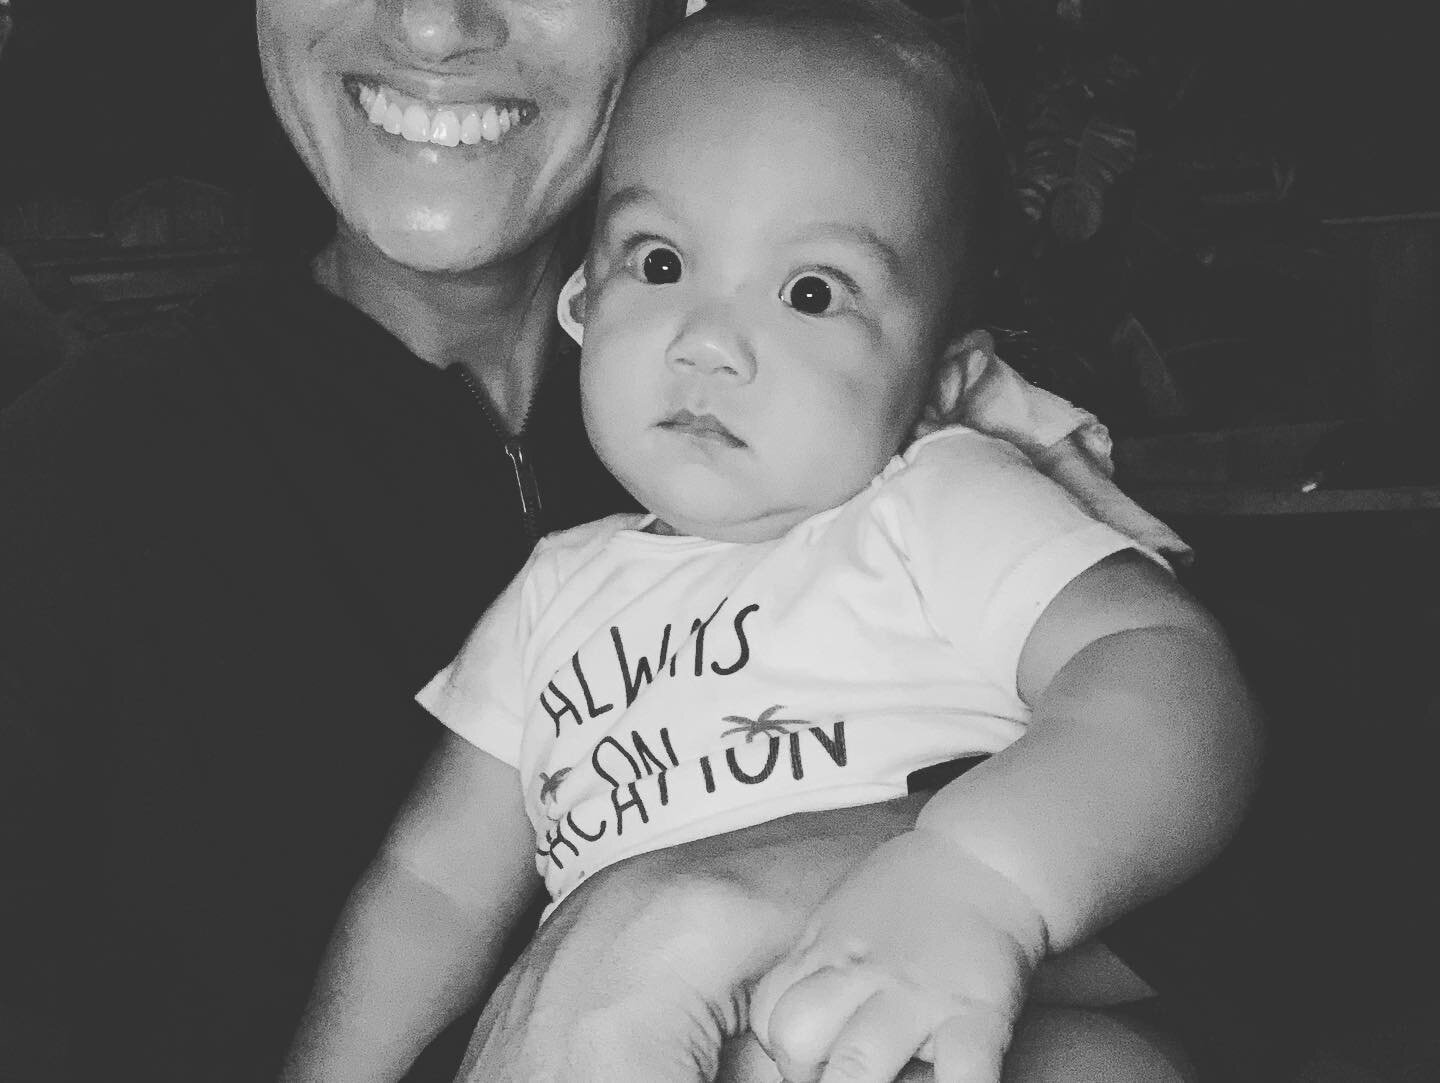 my mom obvi has #baby fever 
.
.
.
grateful for my cousins and all of the other babies around us... 🤙🏽🖤
.
.
not sure they feel the same way 🤣